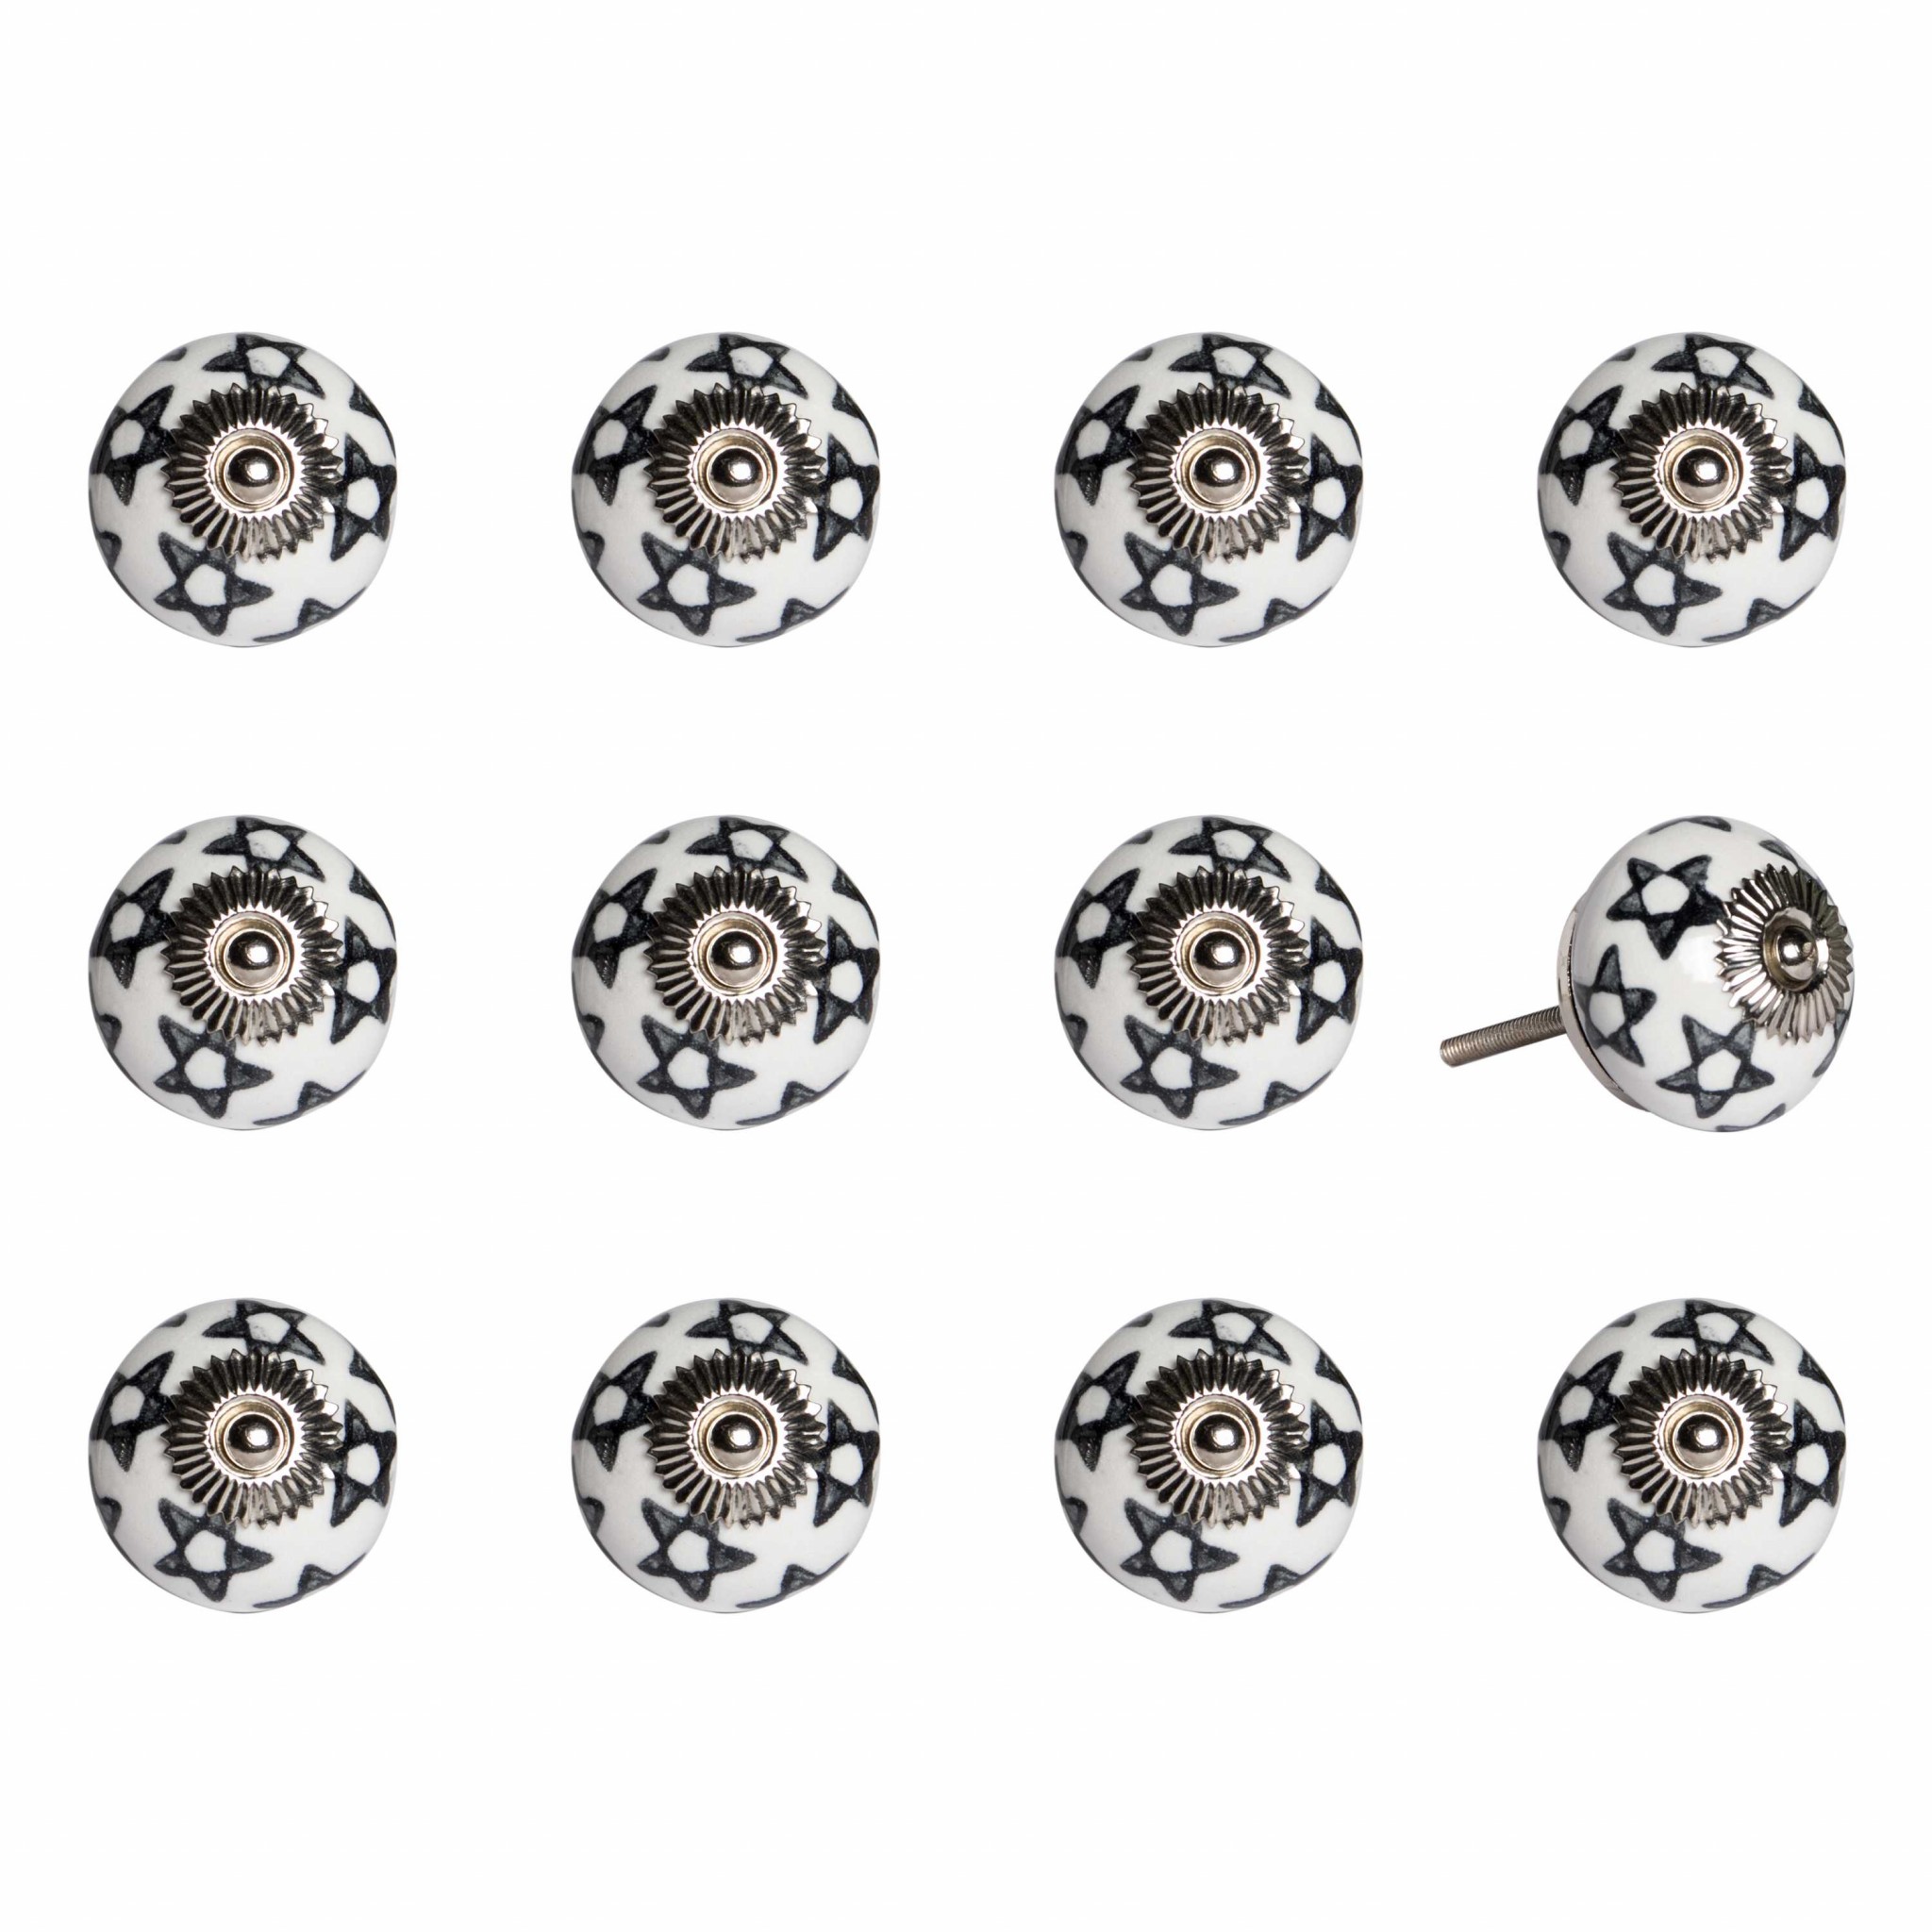 1.5" x 1.5" x 1.5" White, Black and Silver - Knobs 12-Pack